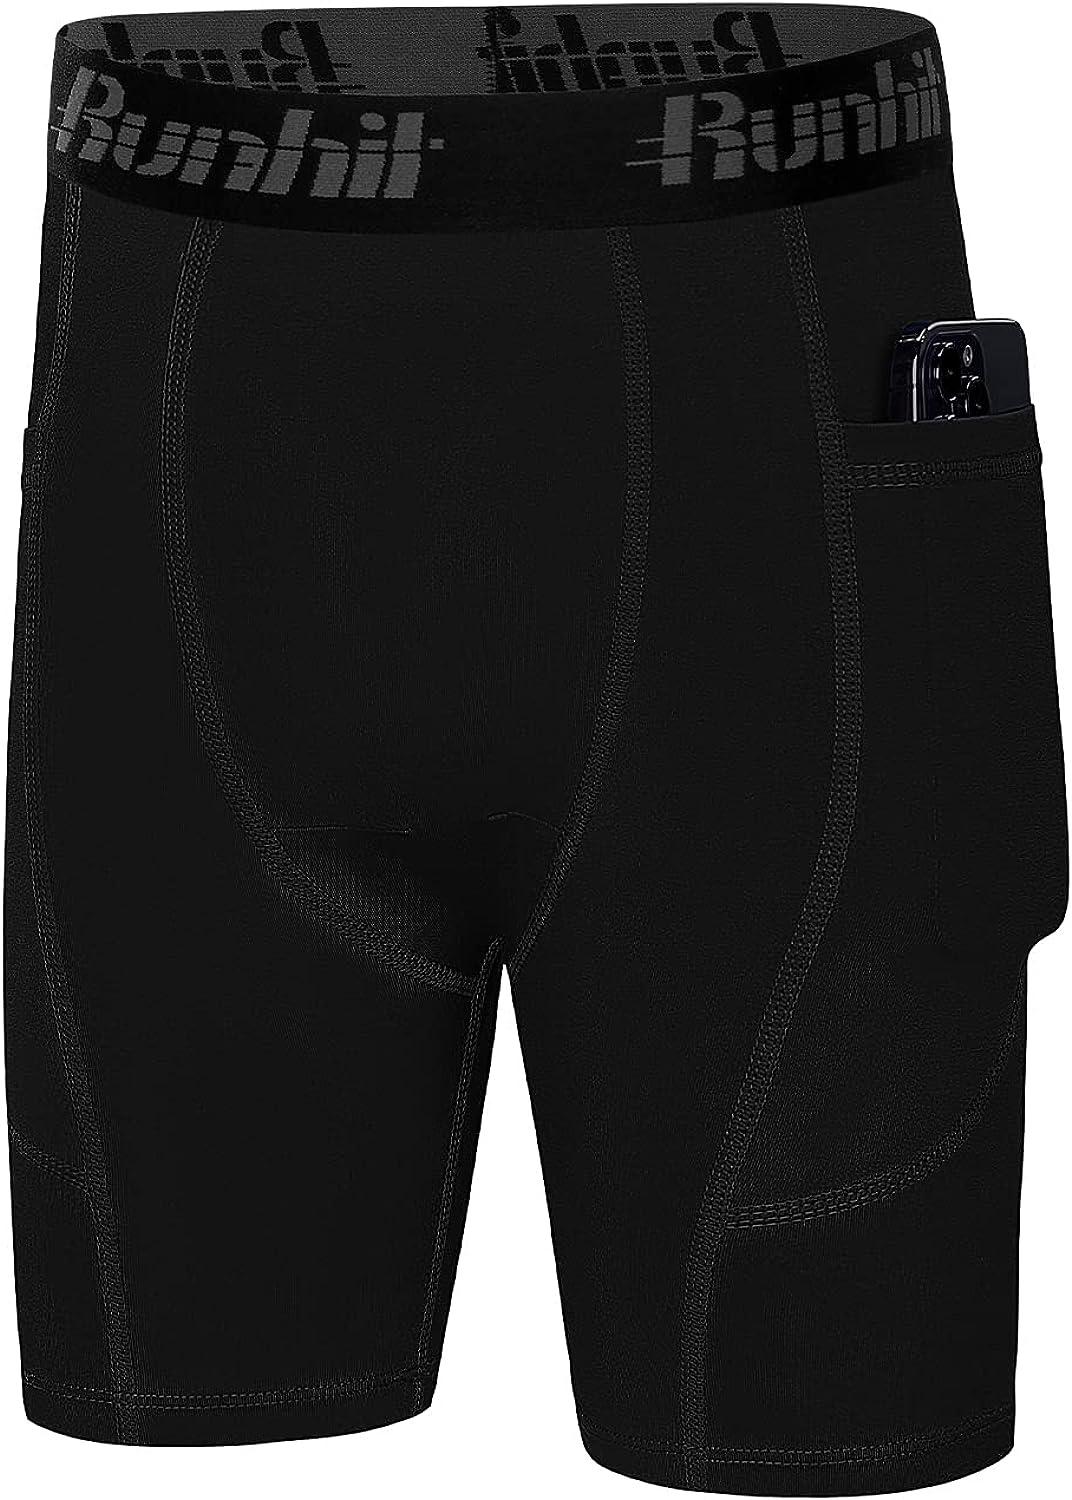  Runhit 4 Youth Girls Volleyball Shorts Spandex